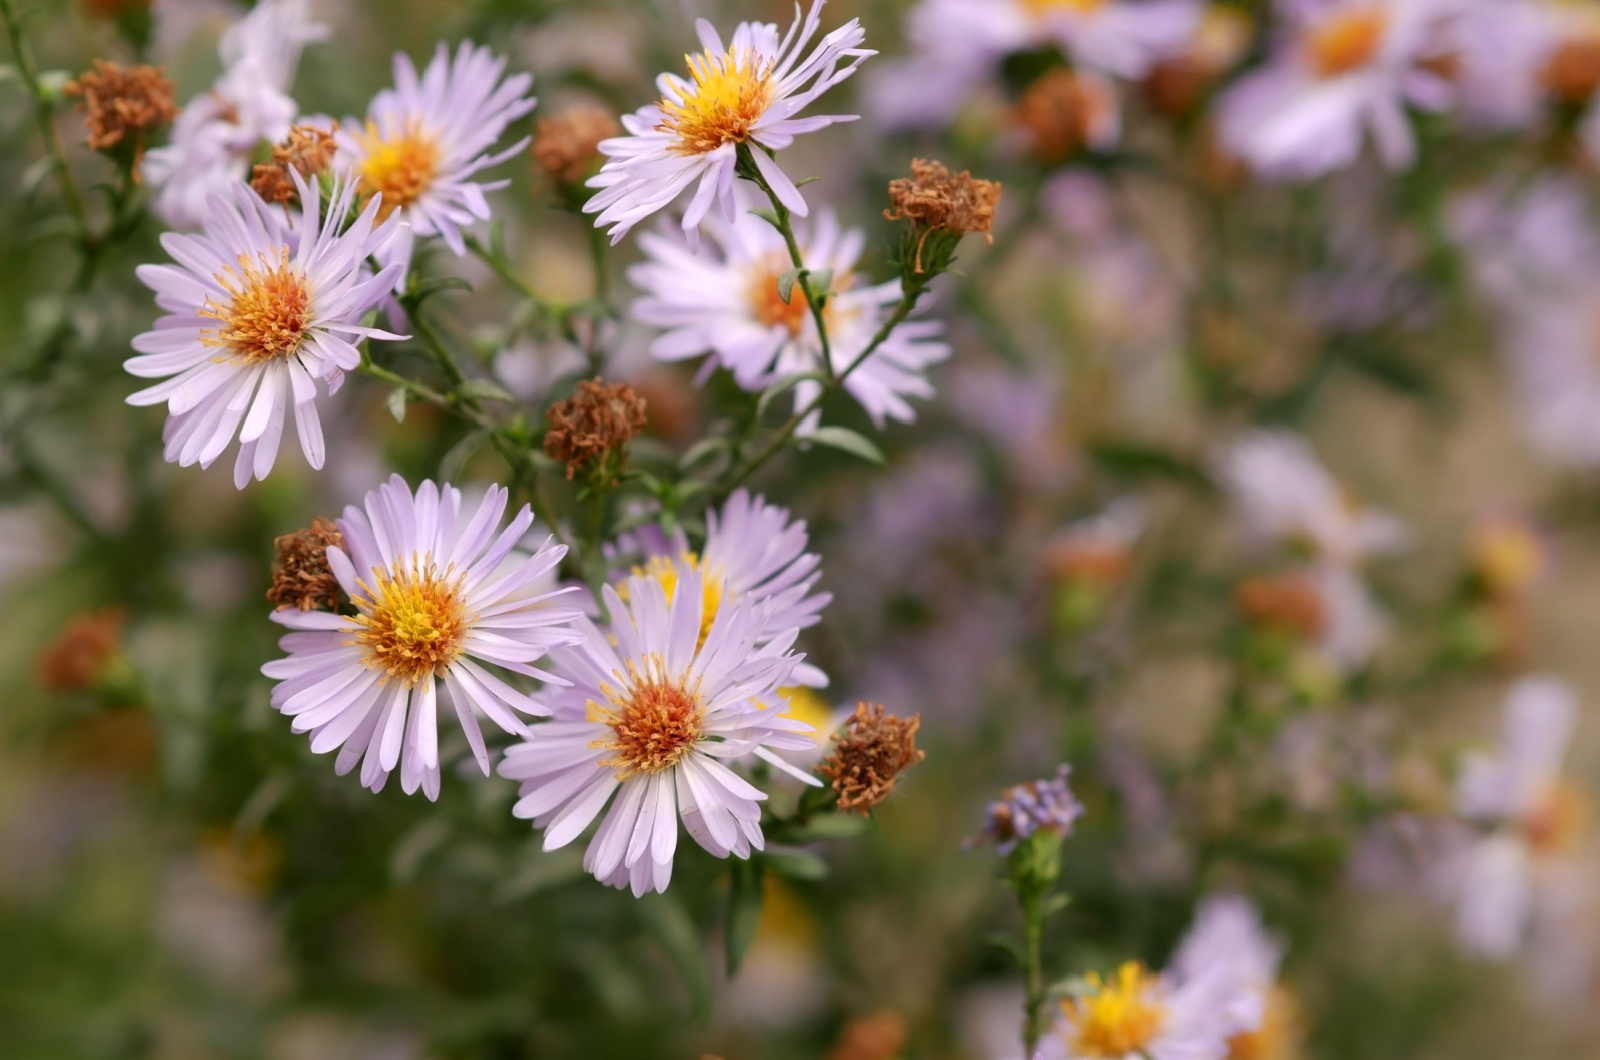 The blossoming New york aster bush